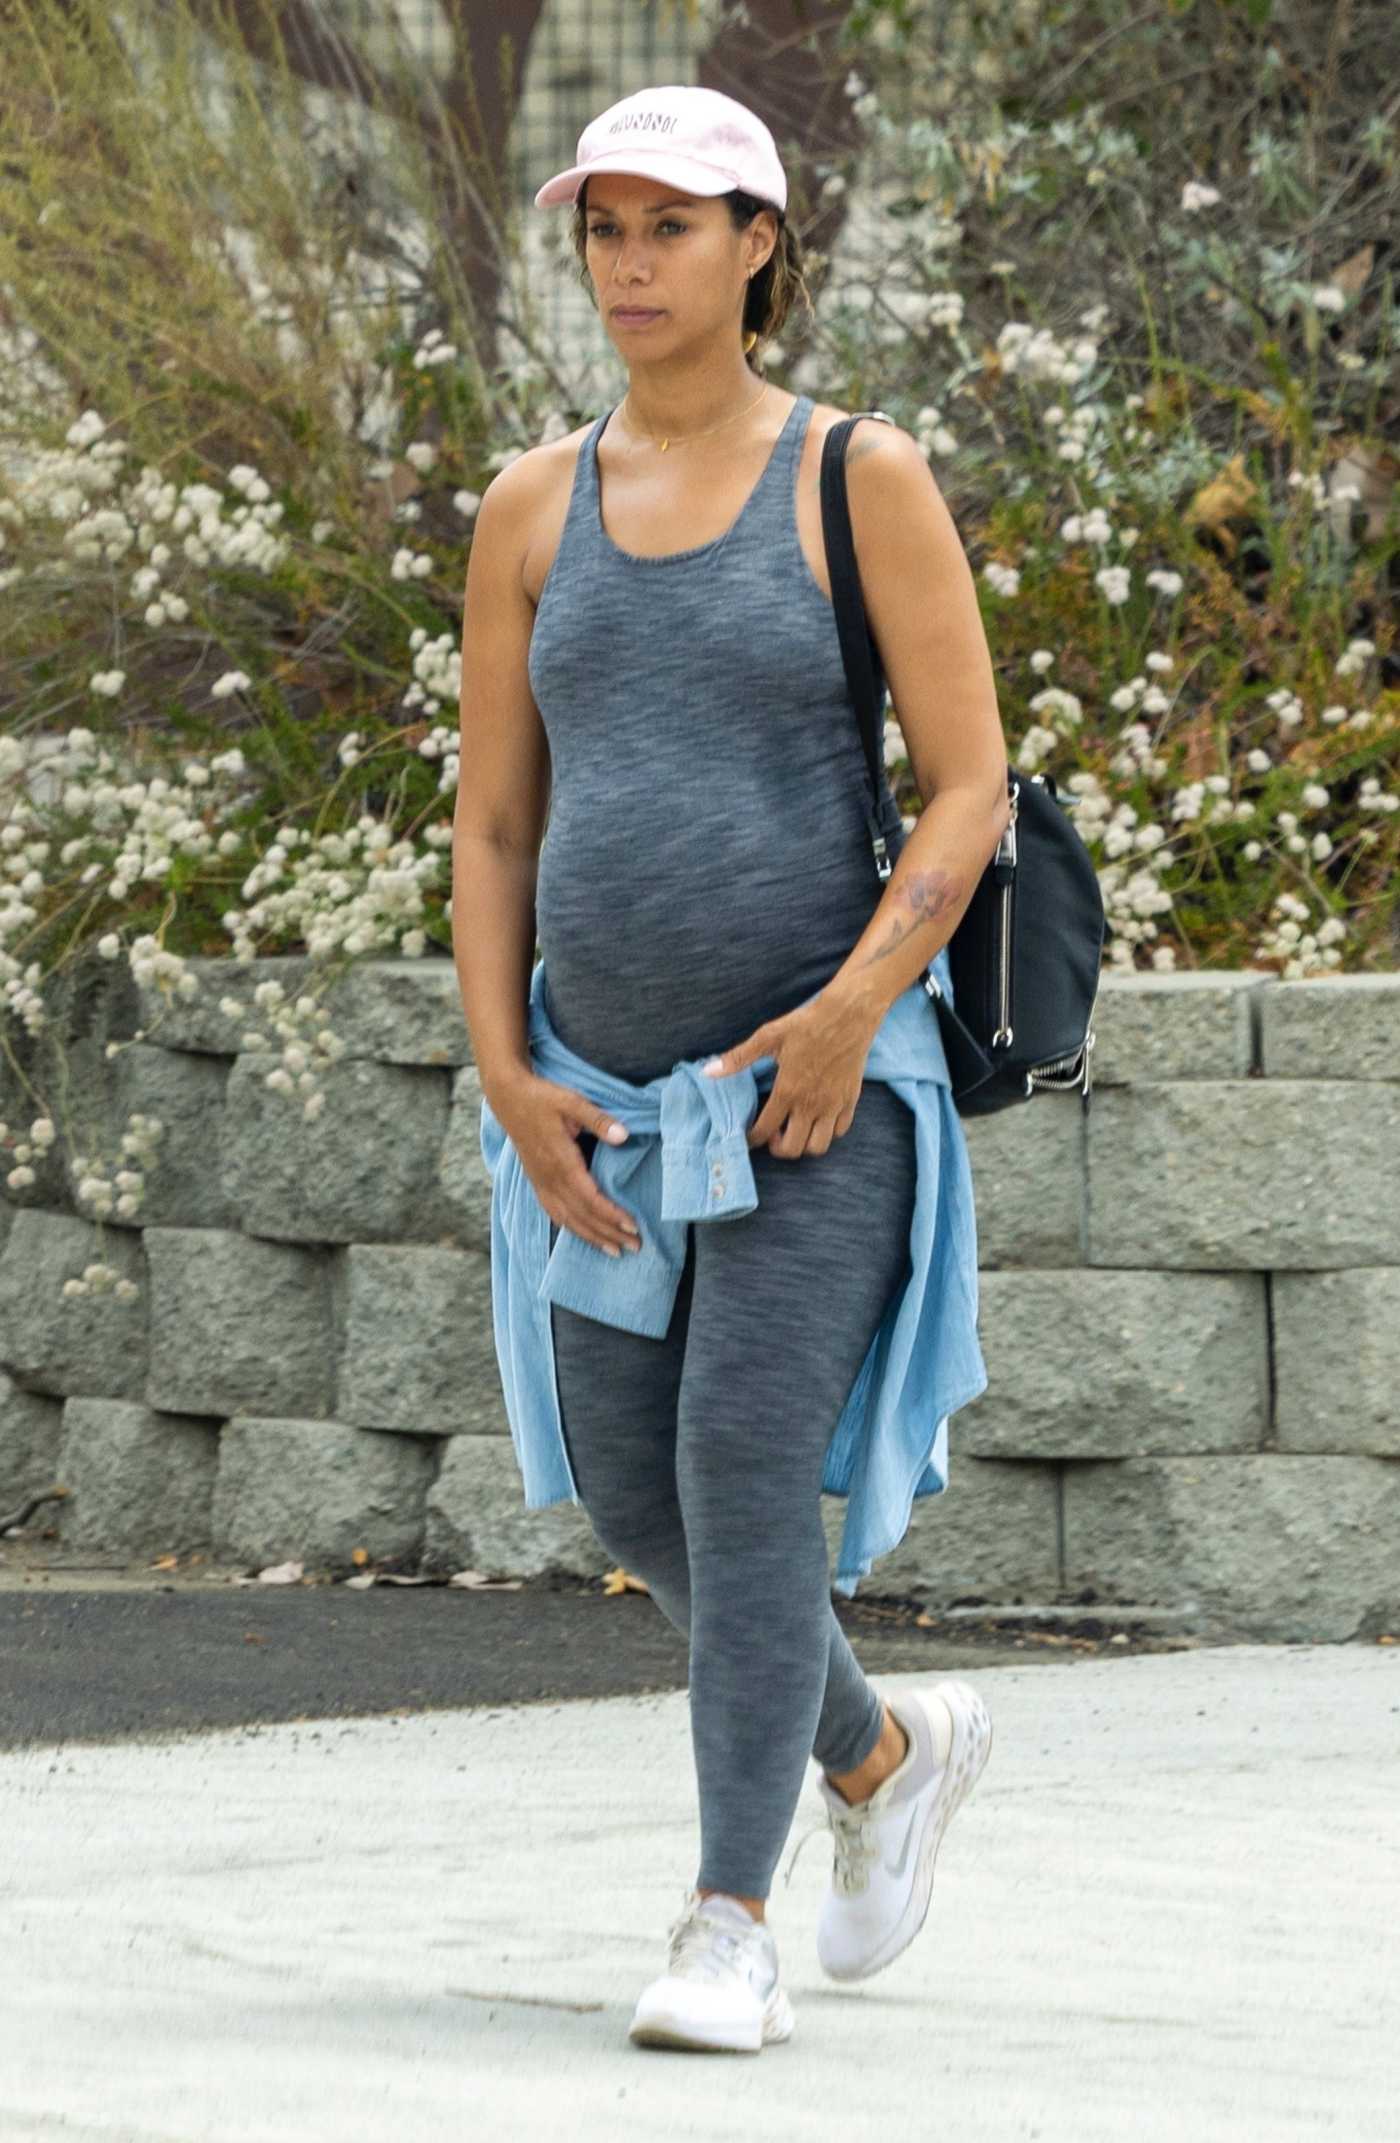 Leona Lewis in a Grey Workout Ensemble Takes a Hike at the Hollywood Hills 06/22/2022